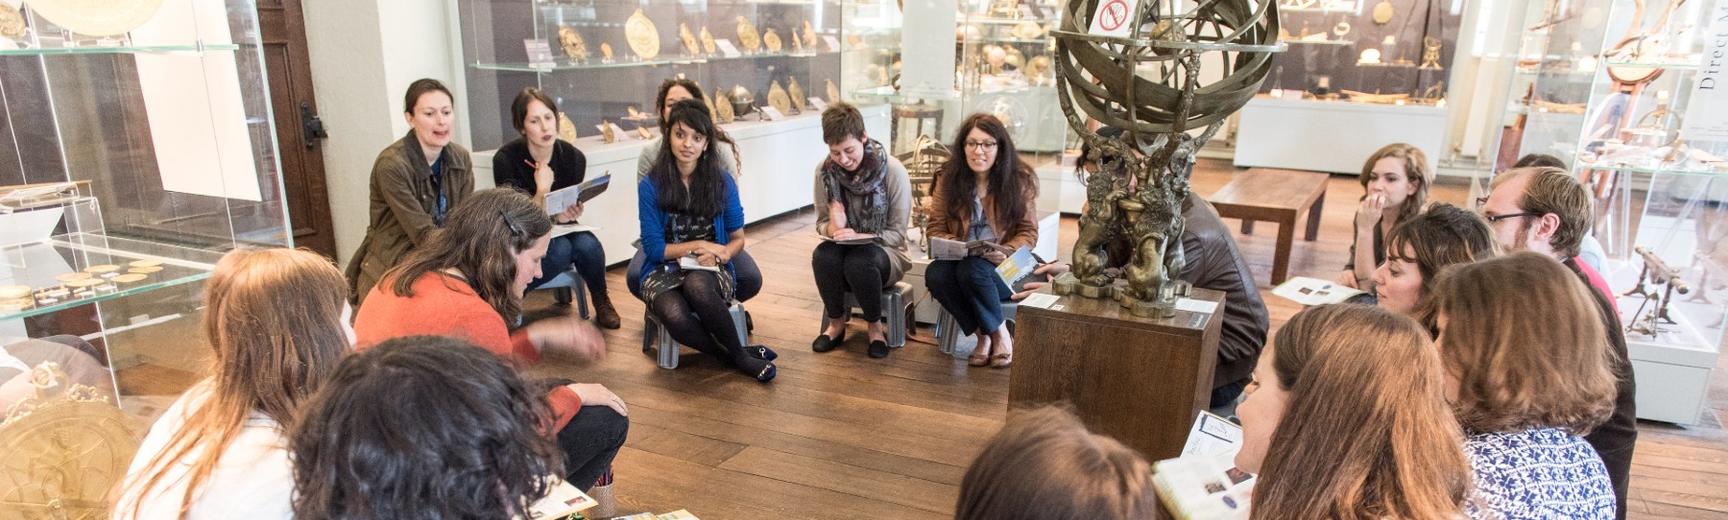 A group of people in a museum hold exhibition guides and sit in a circle discussing